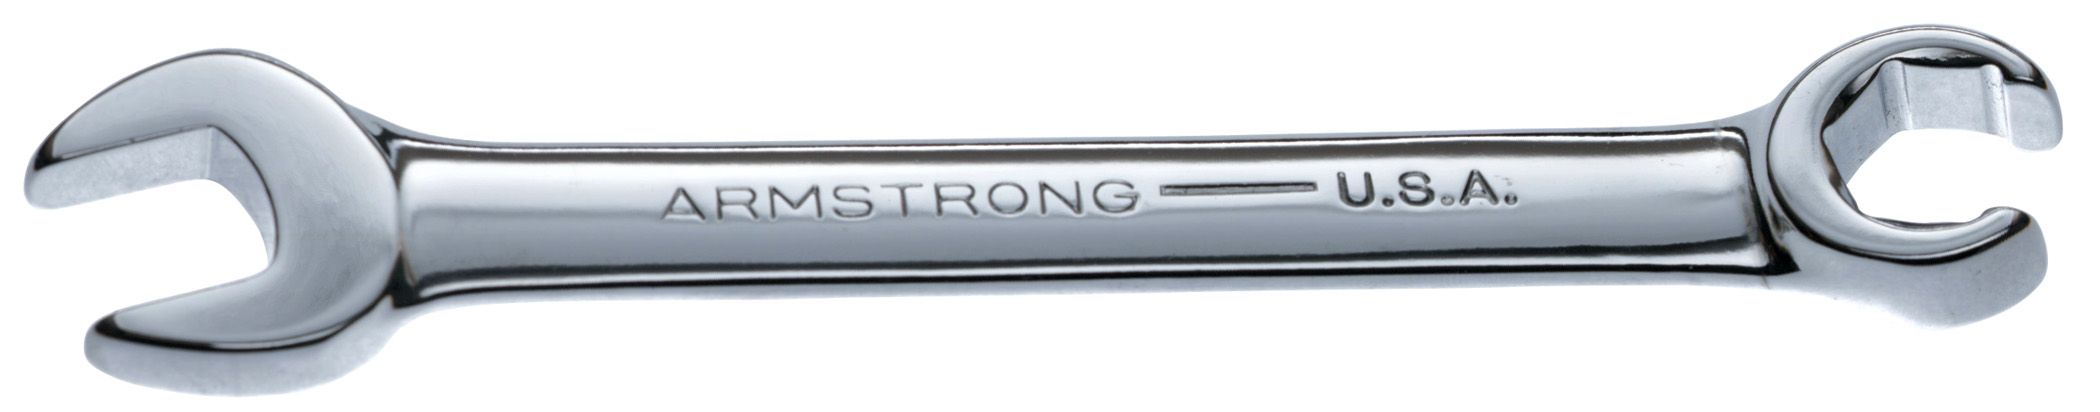 Armstrong 11/16 in. 6 pt. Full Polish Combination Flare Nut Wrench